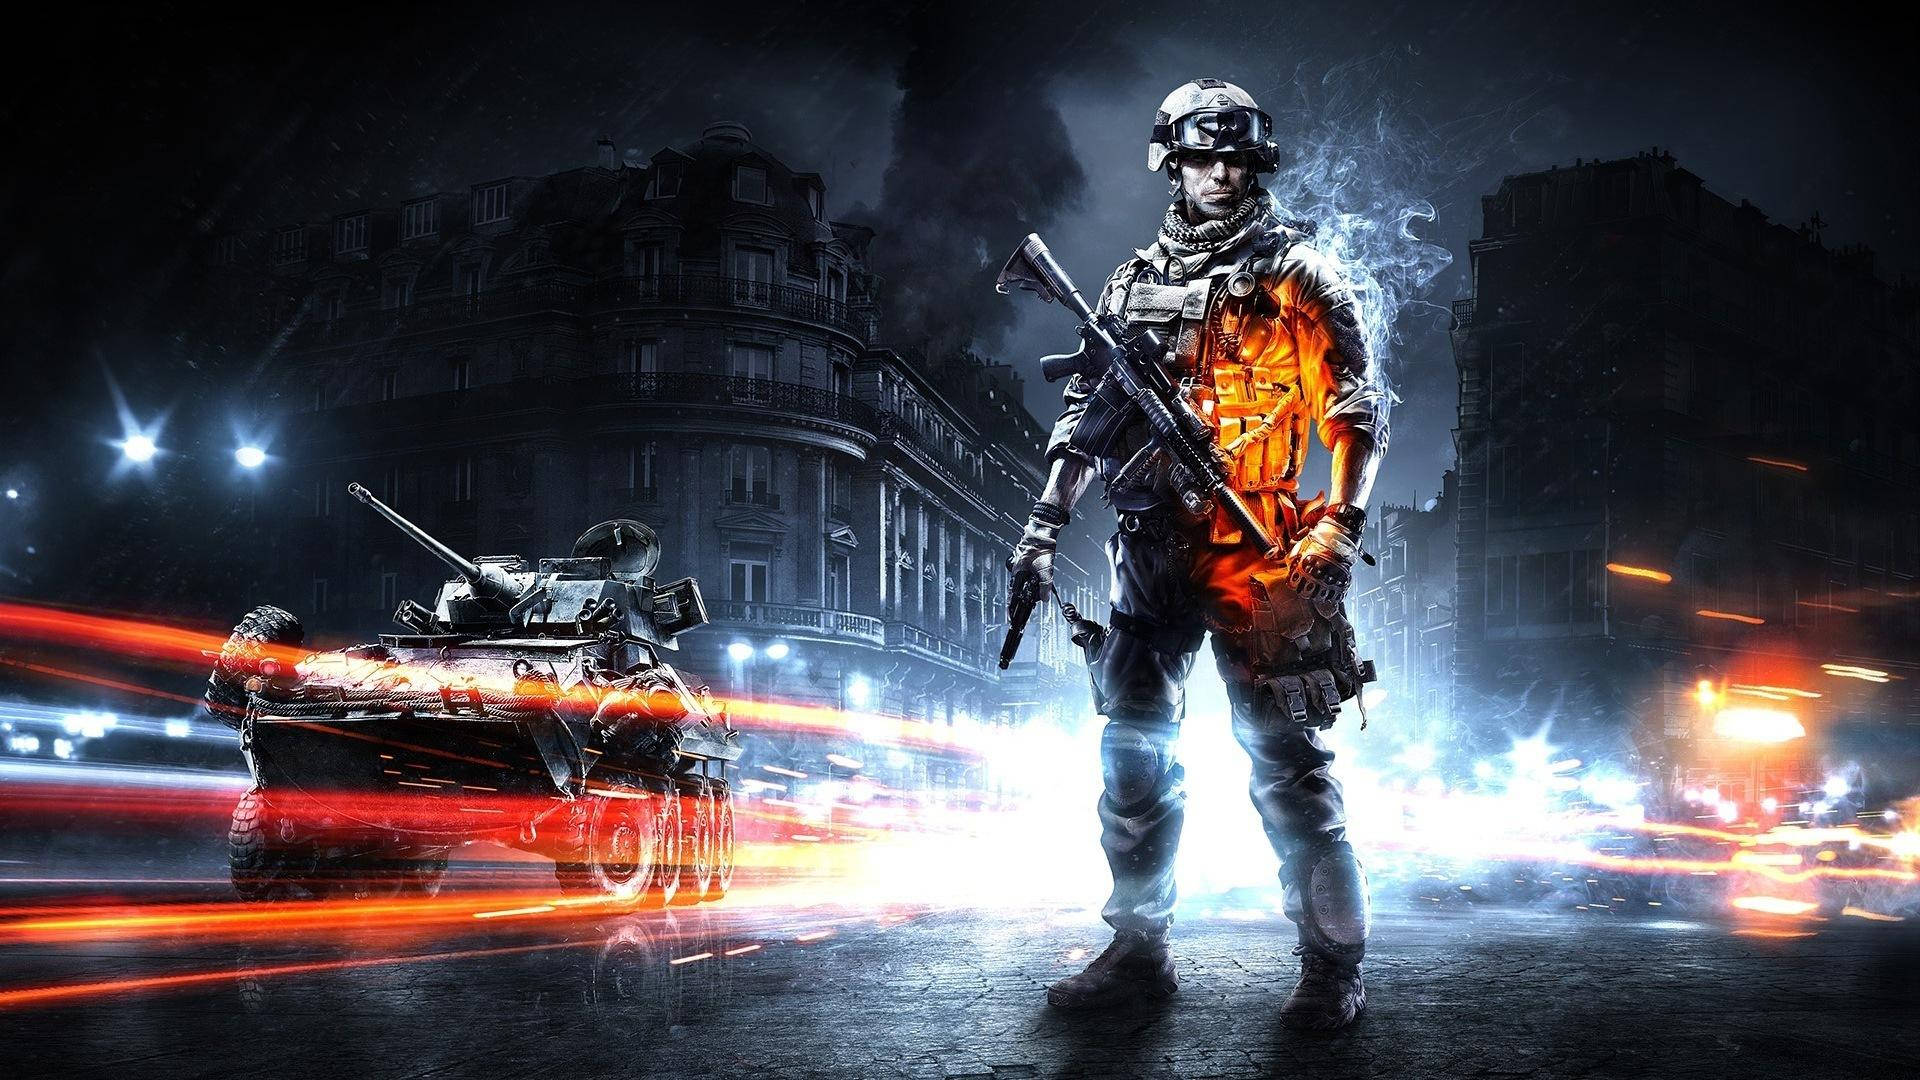 170+ Battlefield 3 HD Wallpapers and Backgrounds